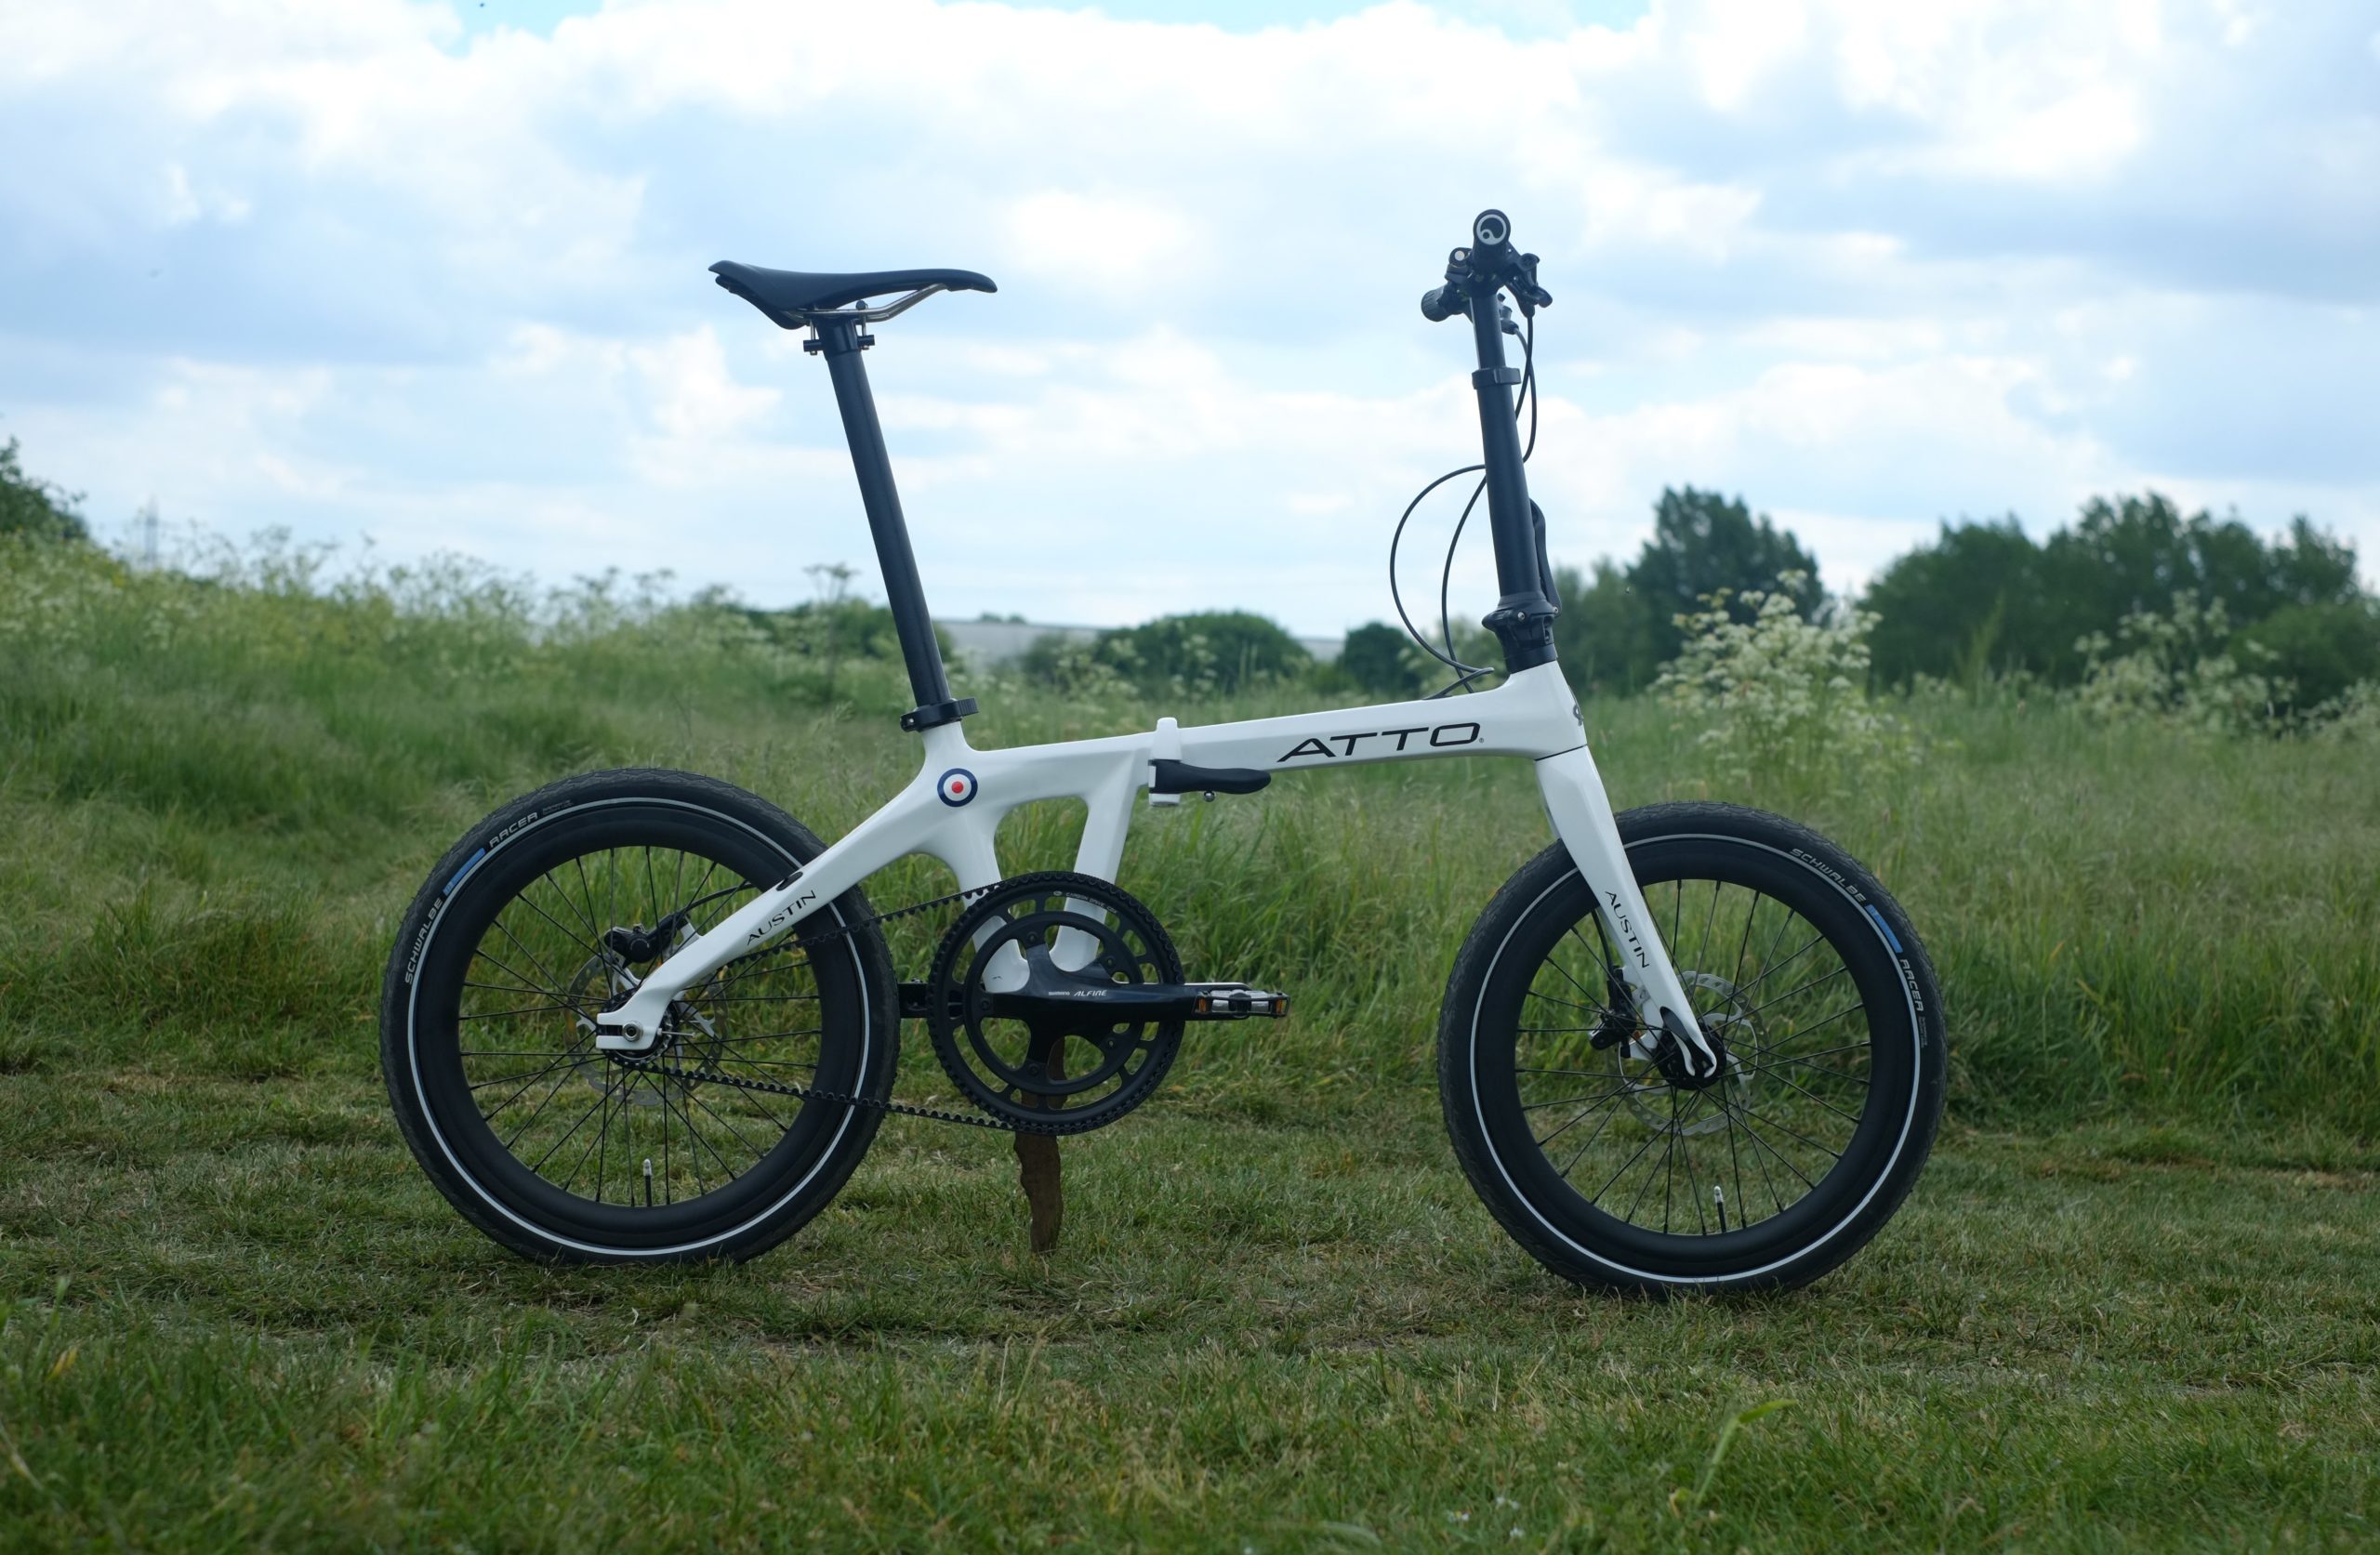 AC Atto folding bike first ride review - Cyclist